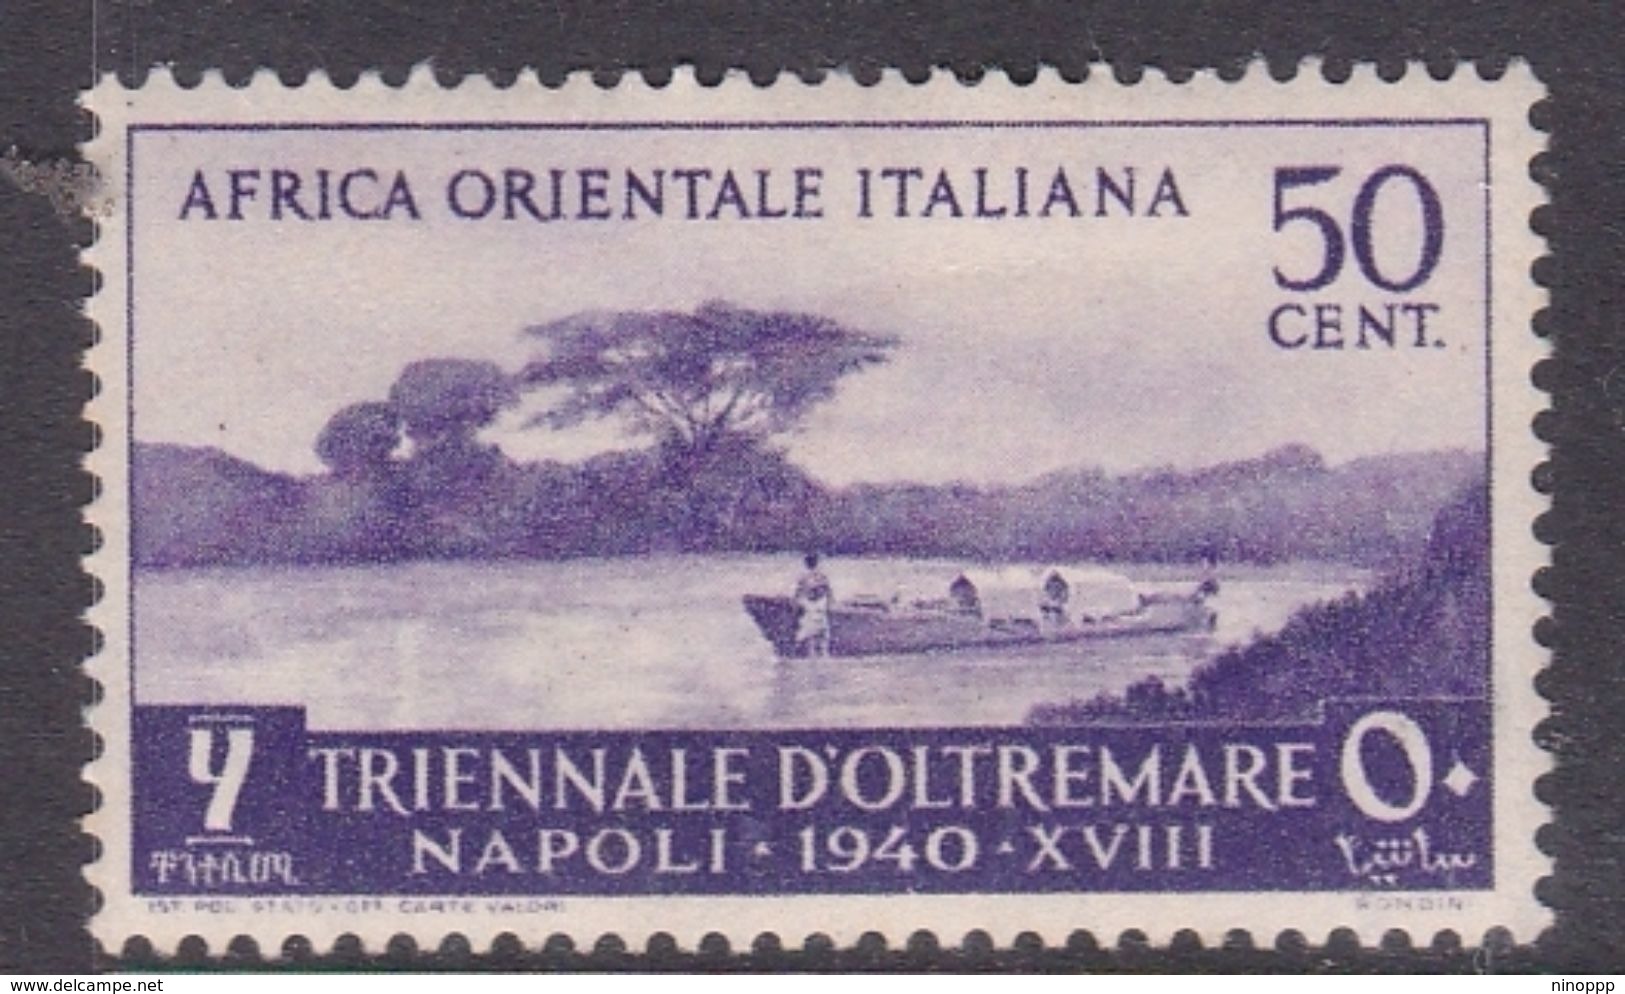 Italy-Colonies And Territories-Italian Eastern Africa S30 1940 First Triennial Overseas Exposition 50c Purple MH - General Issues